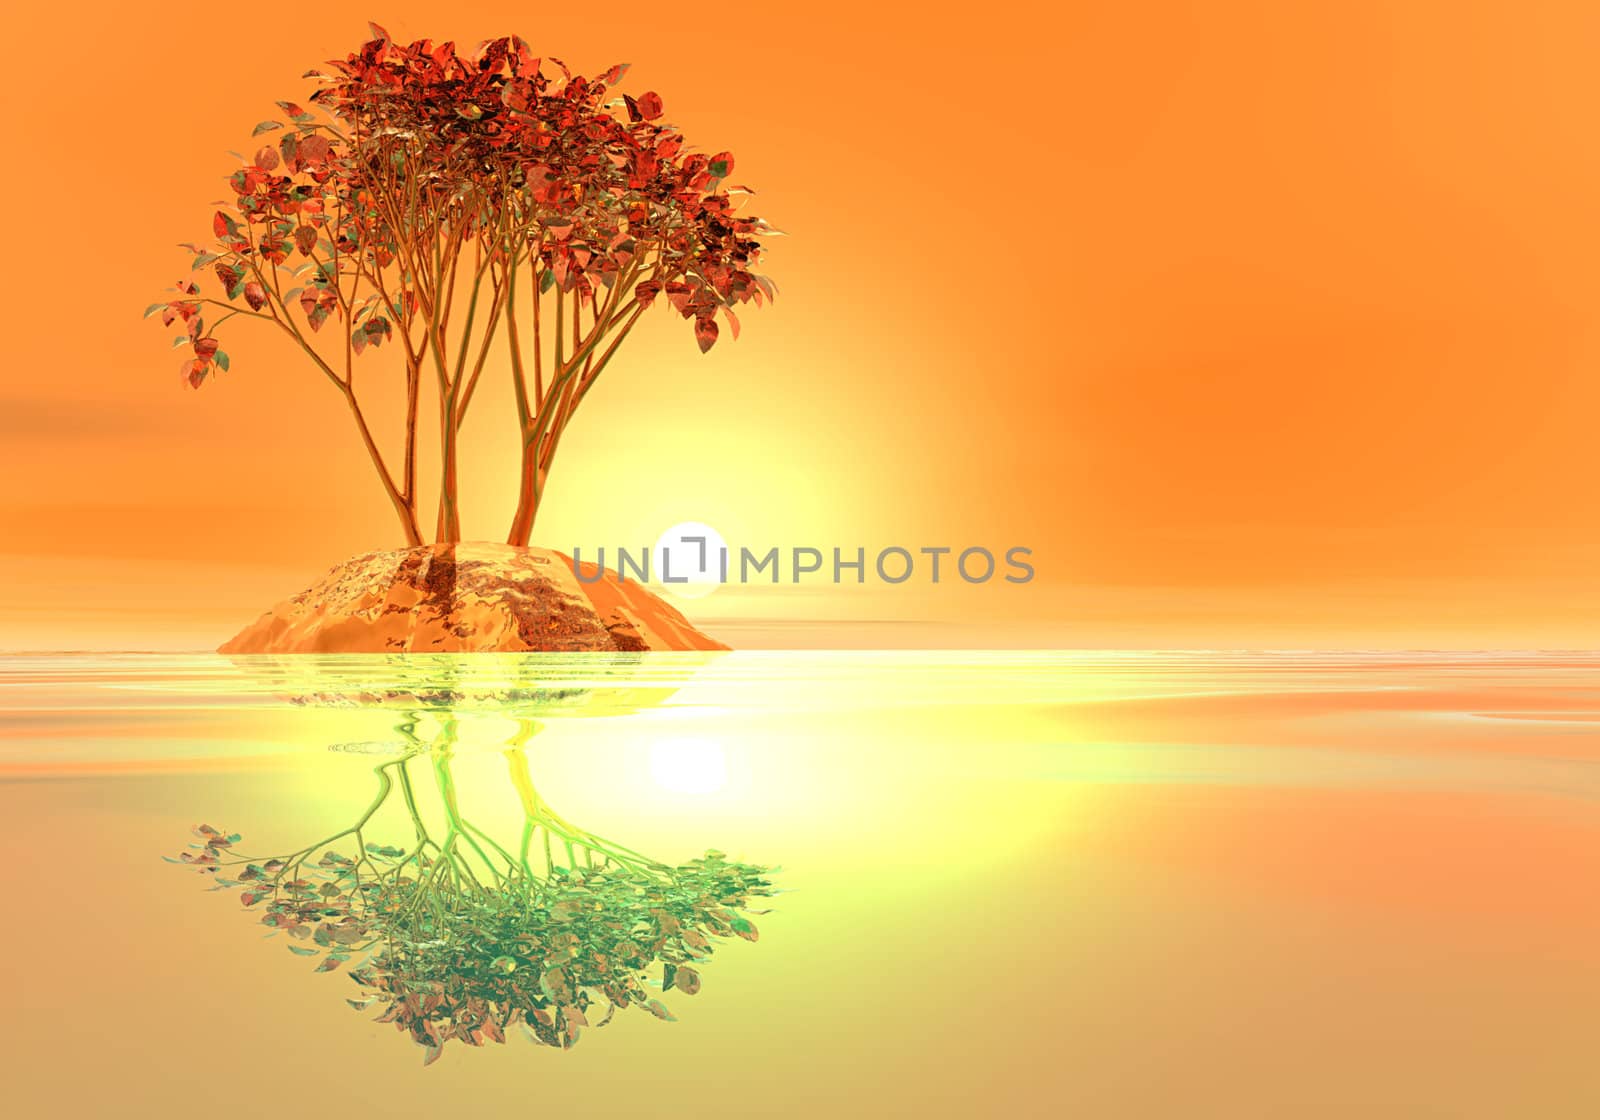 abstract creative picture of a small island with vegetation